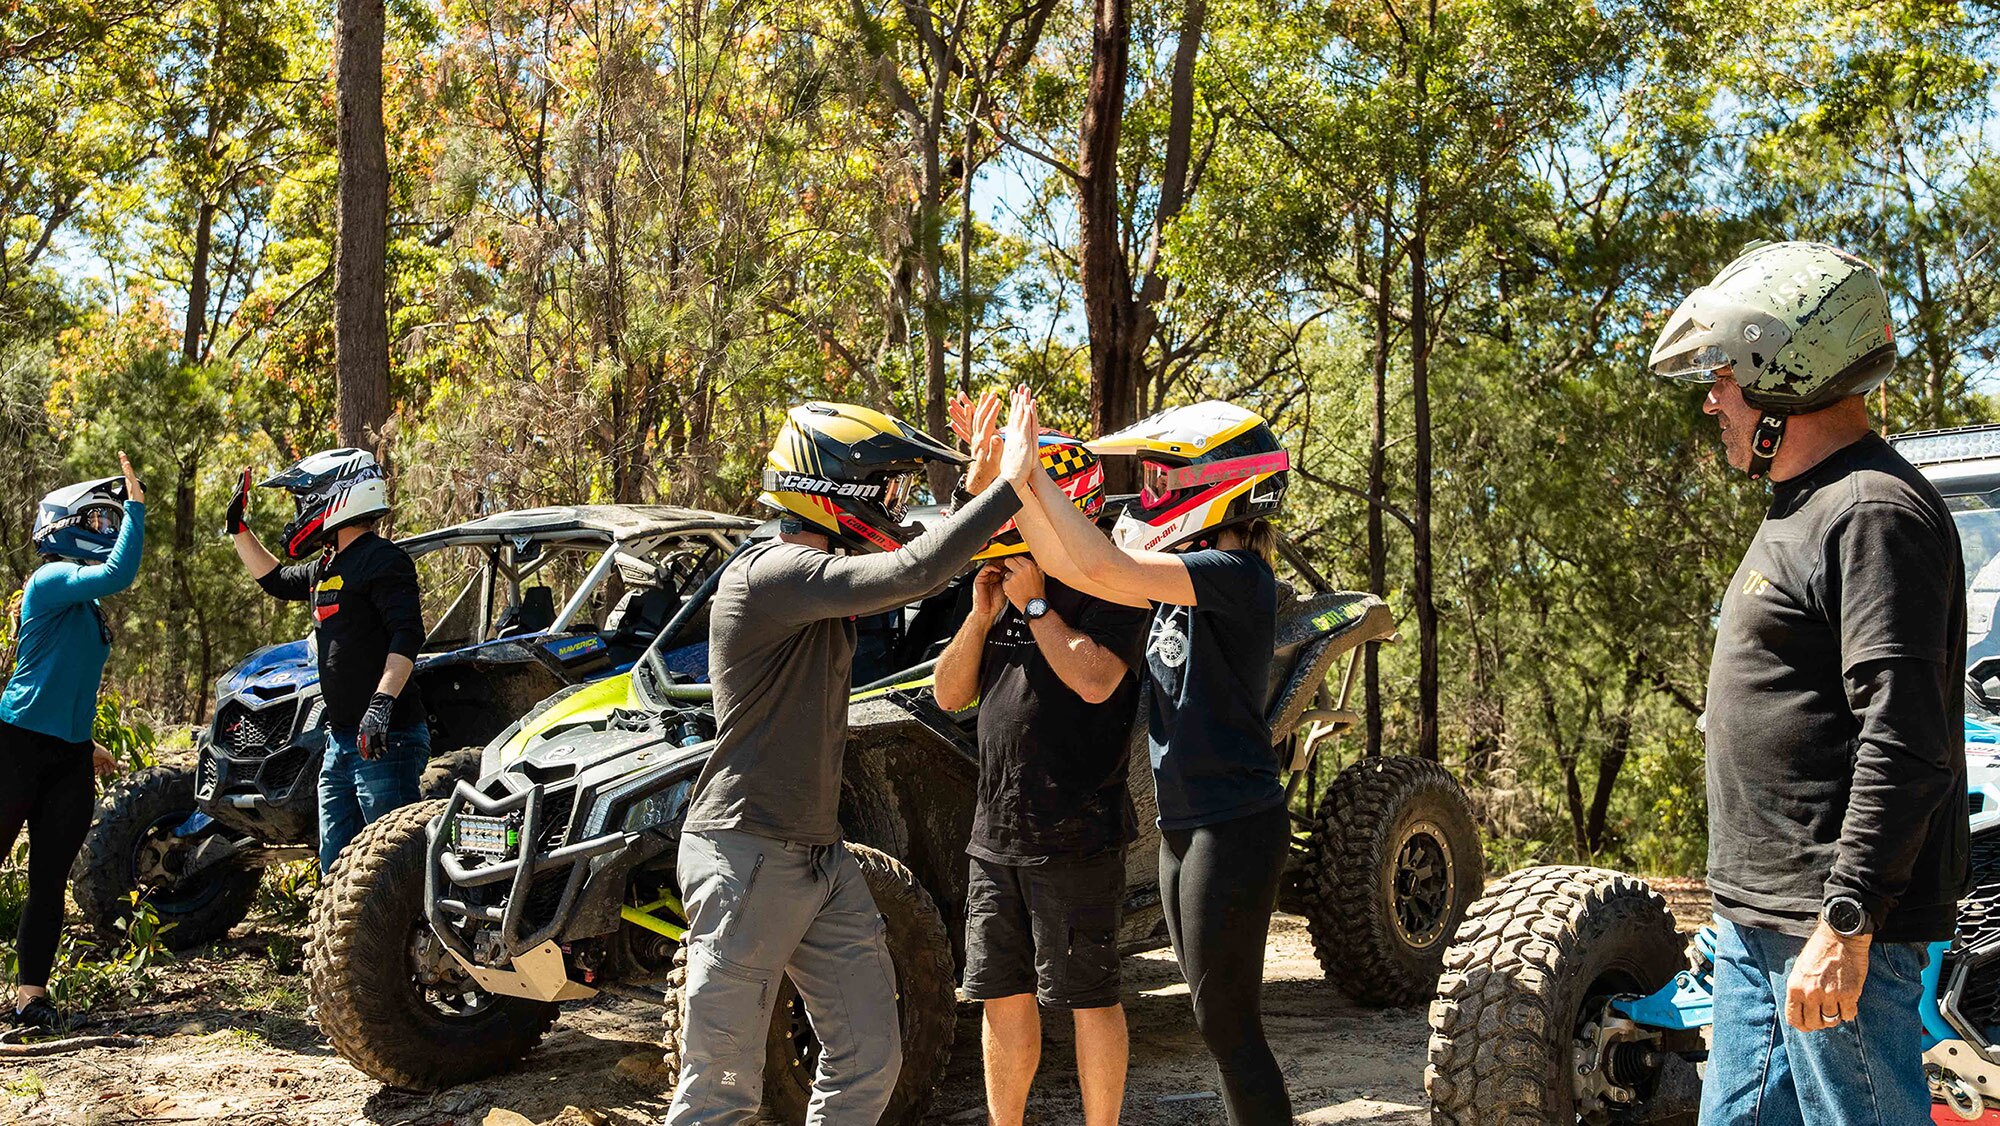 A group of people high fiving and celebrating in front of Can-Am side by sides with trees in the back.